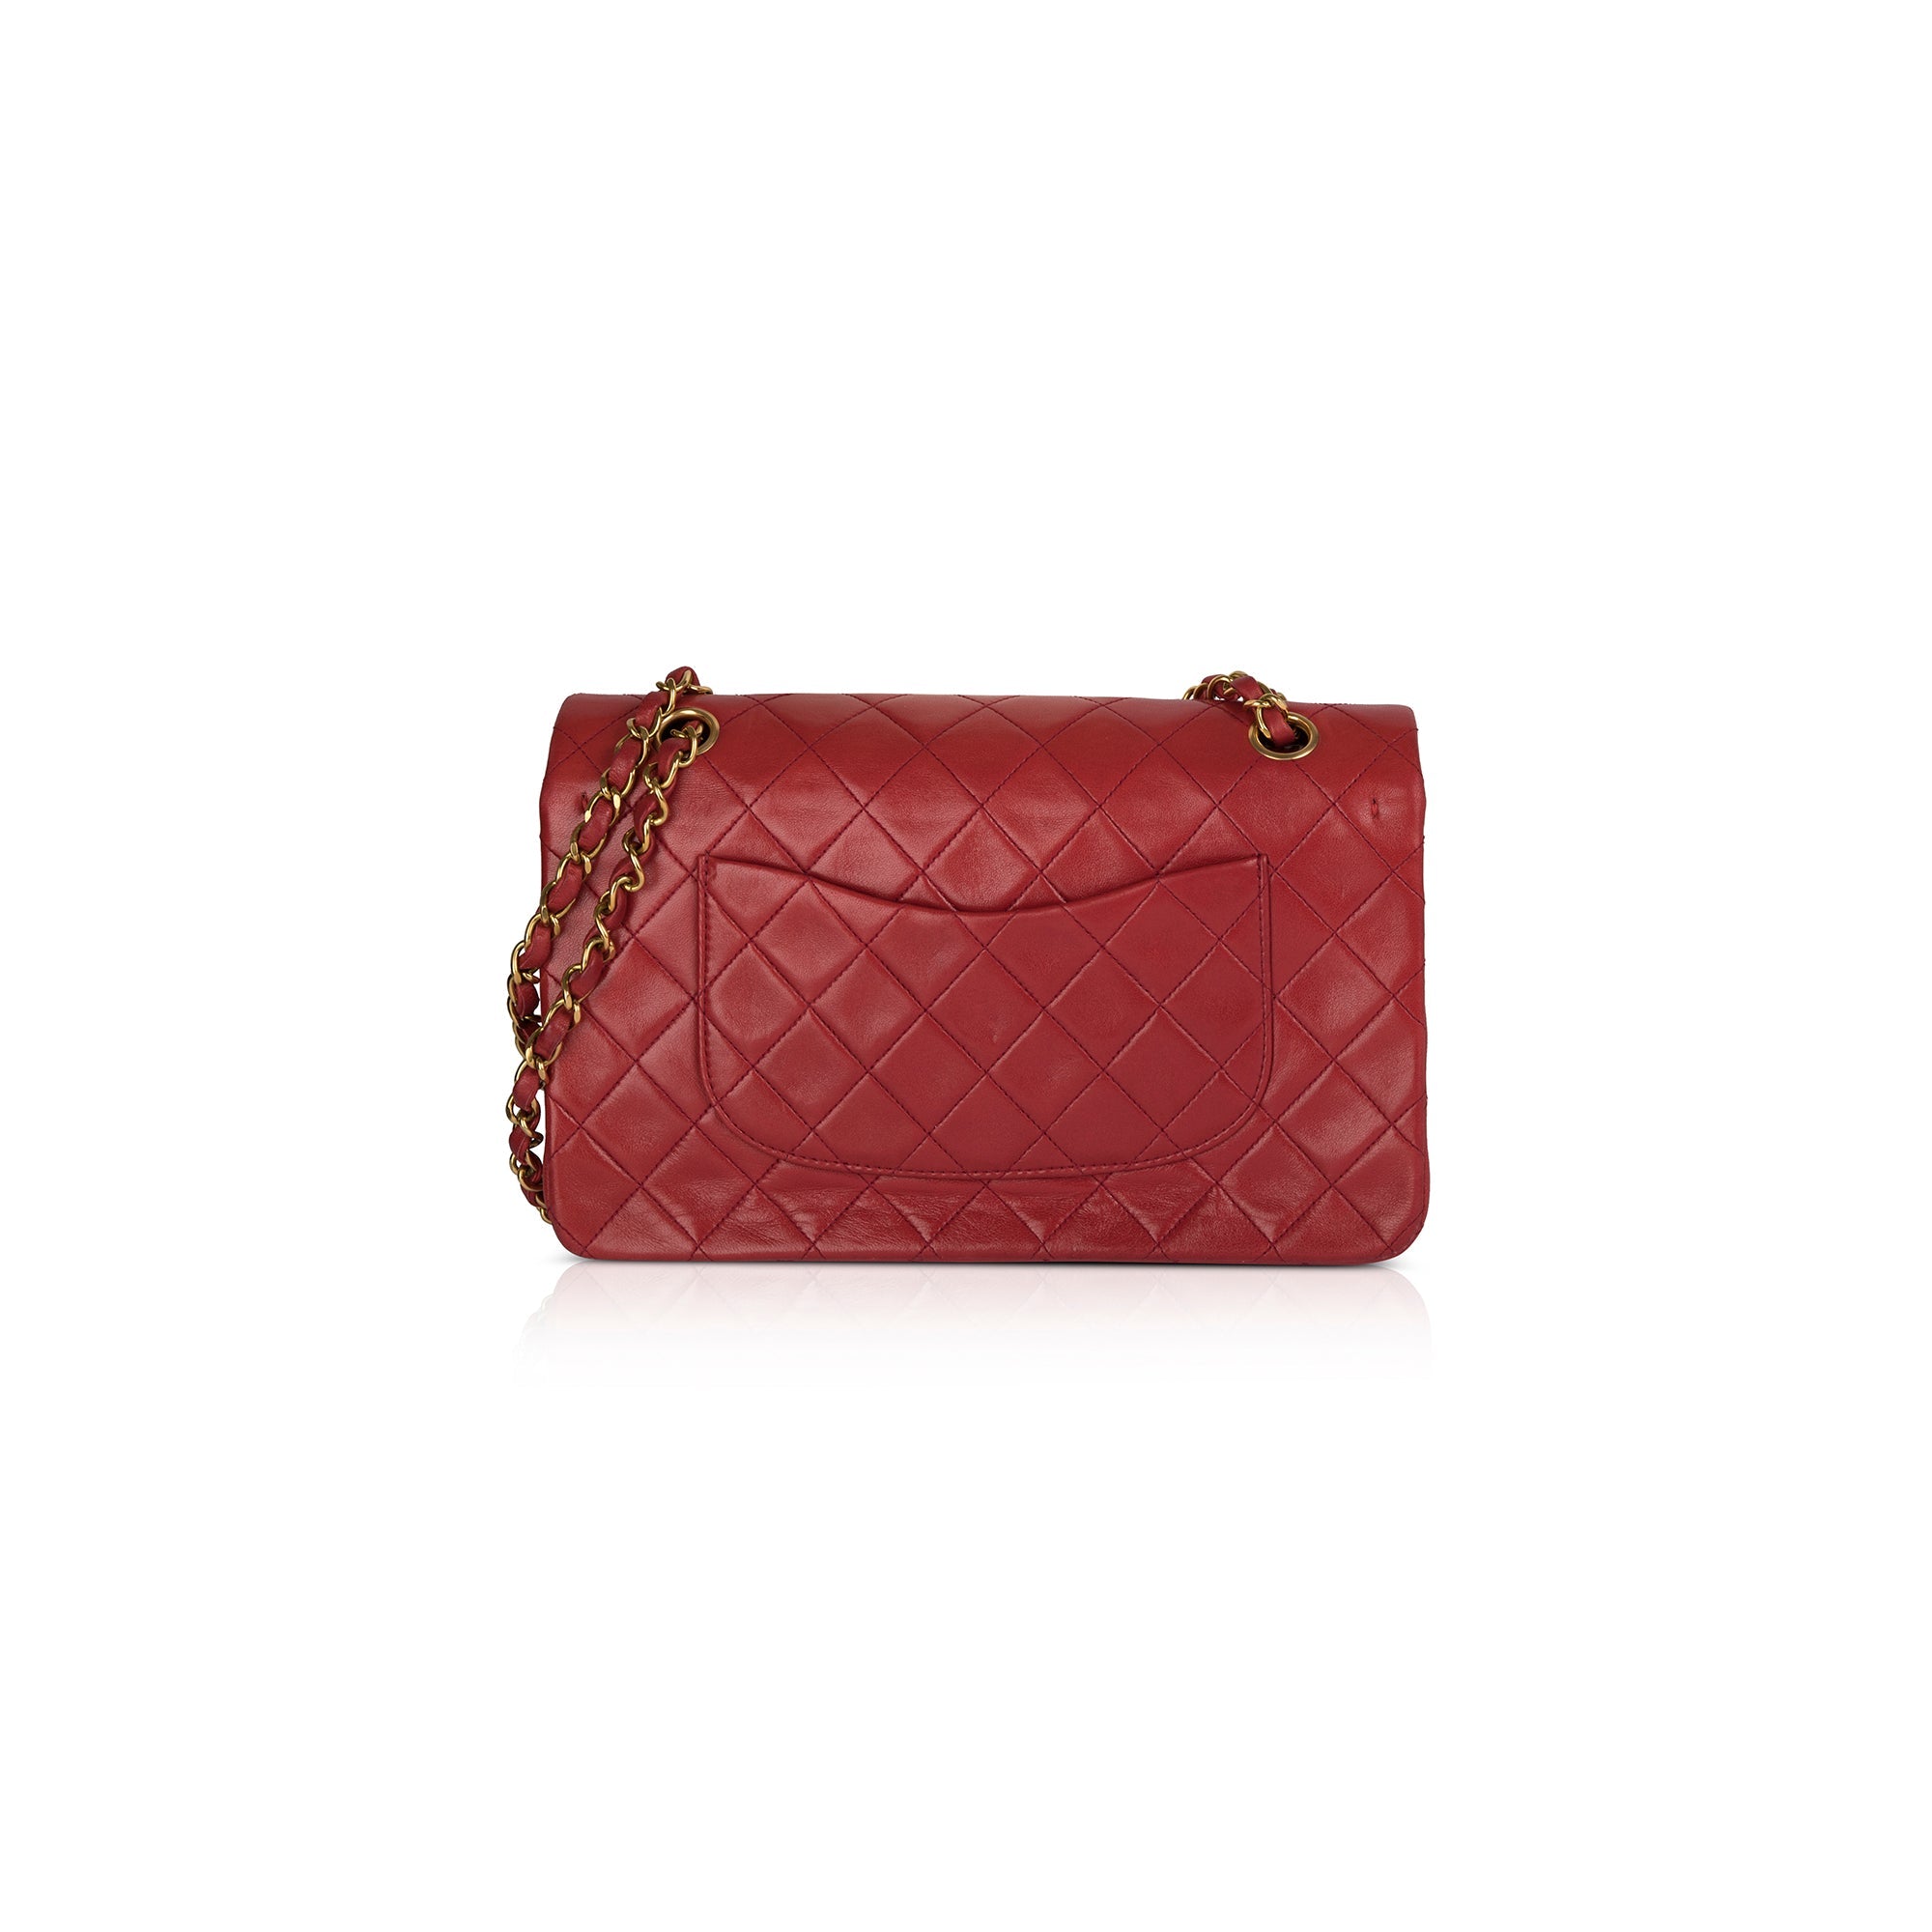 Chanel Classic Quilted Lambskin Double Flap Medium Bag in Red